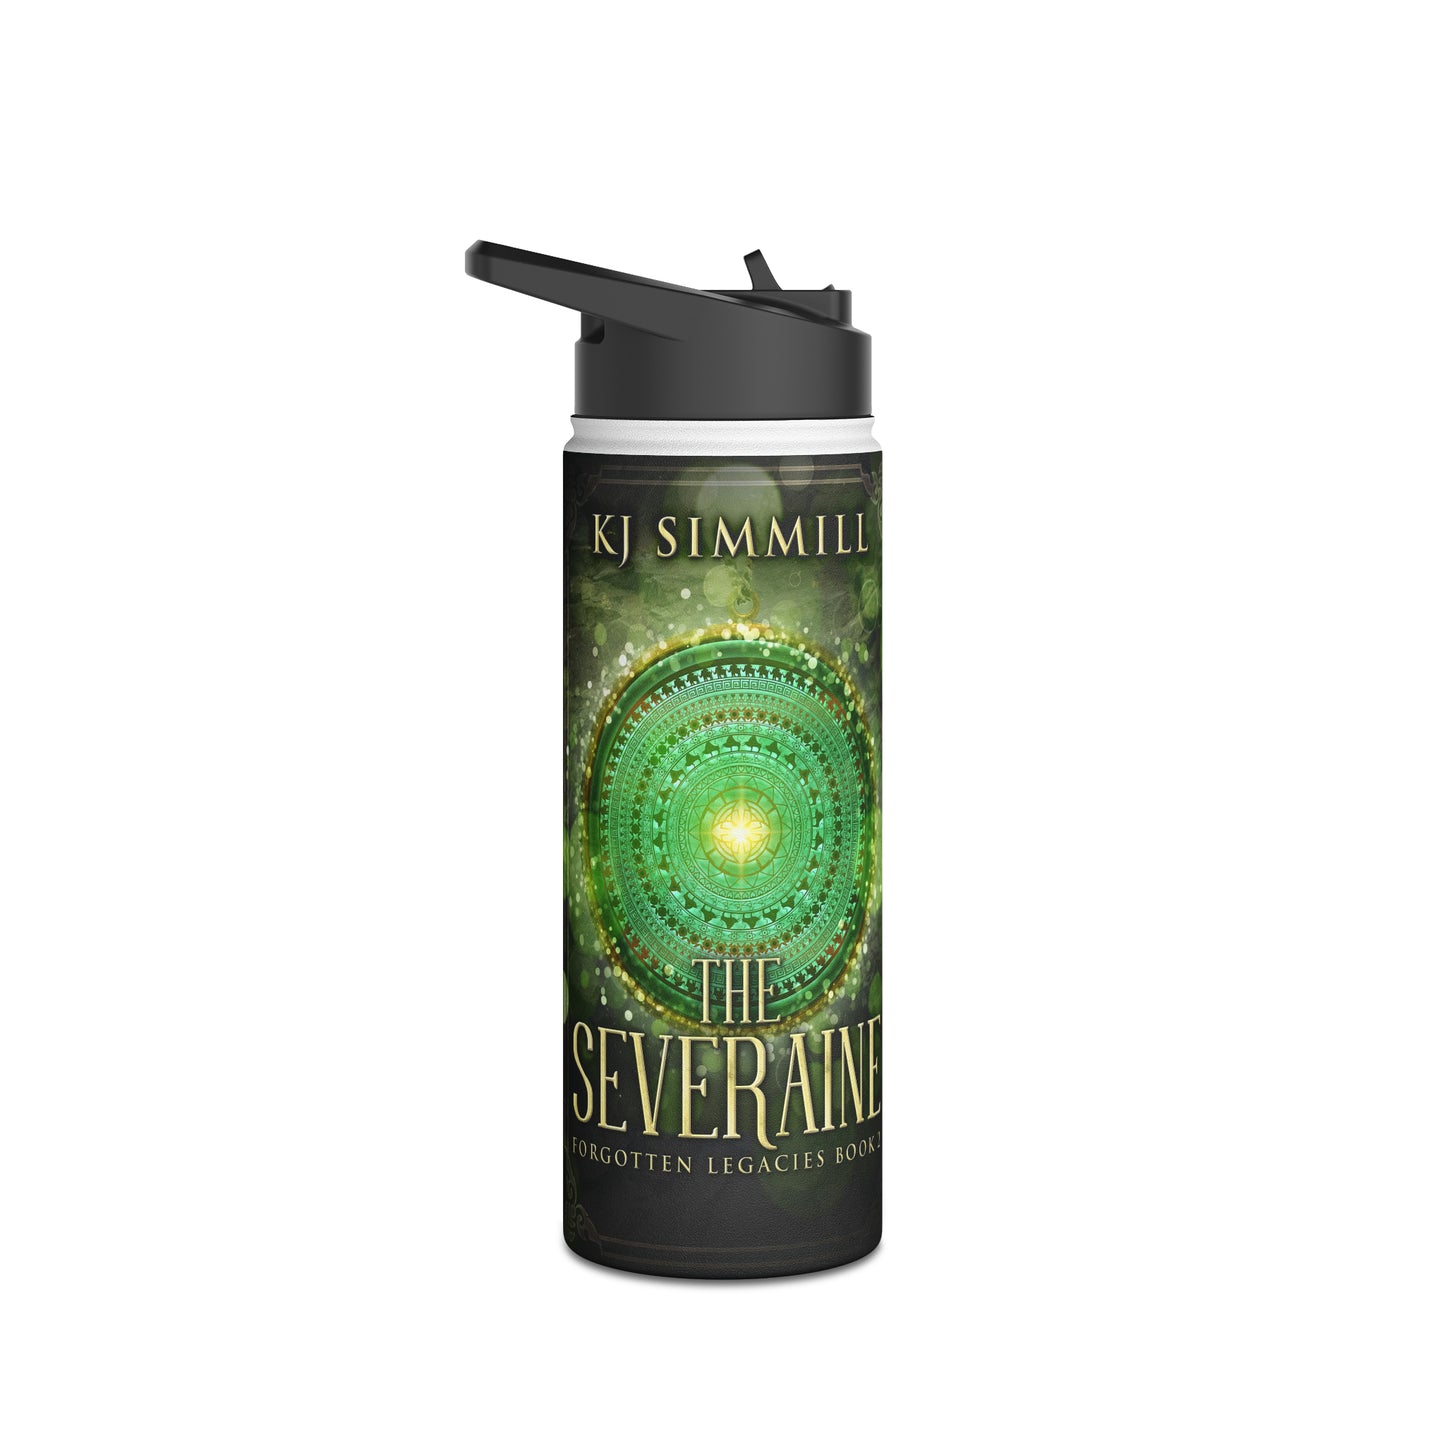 The Severaine - Stainless Steel Water Bottle